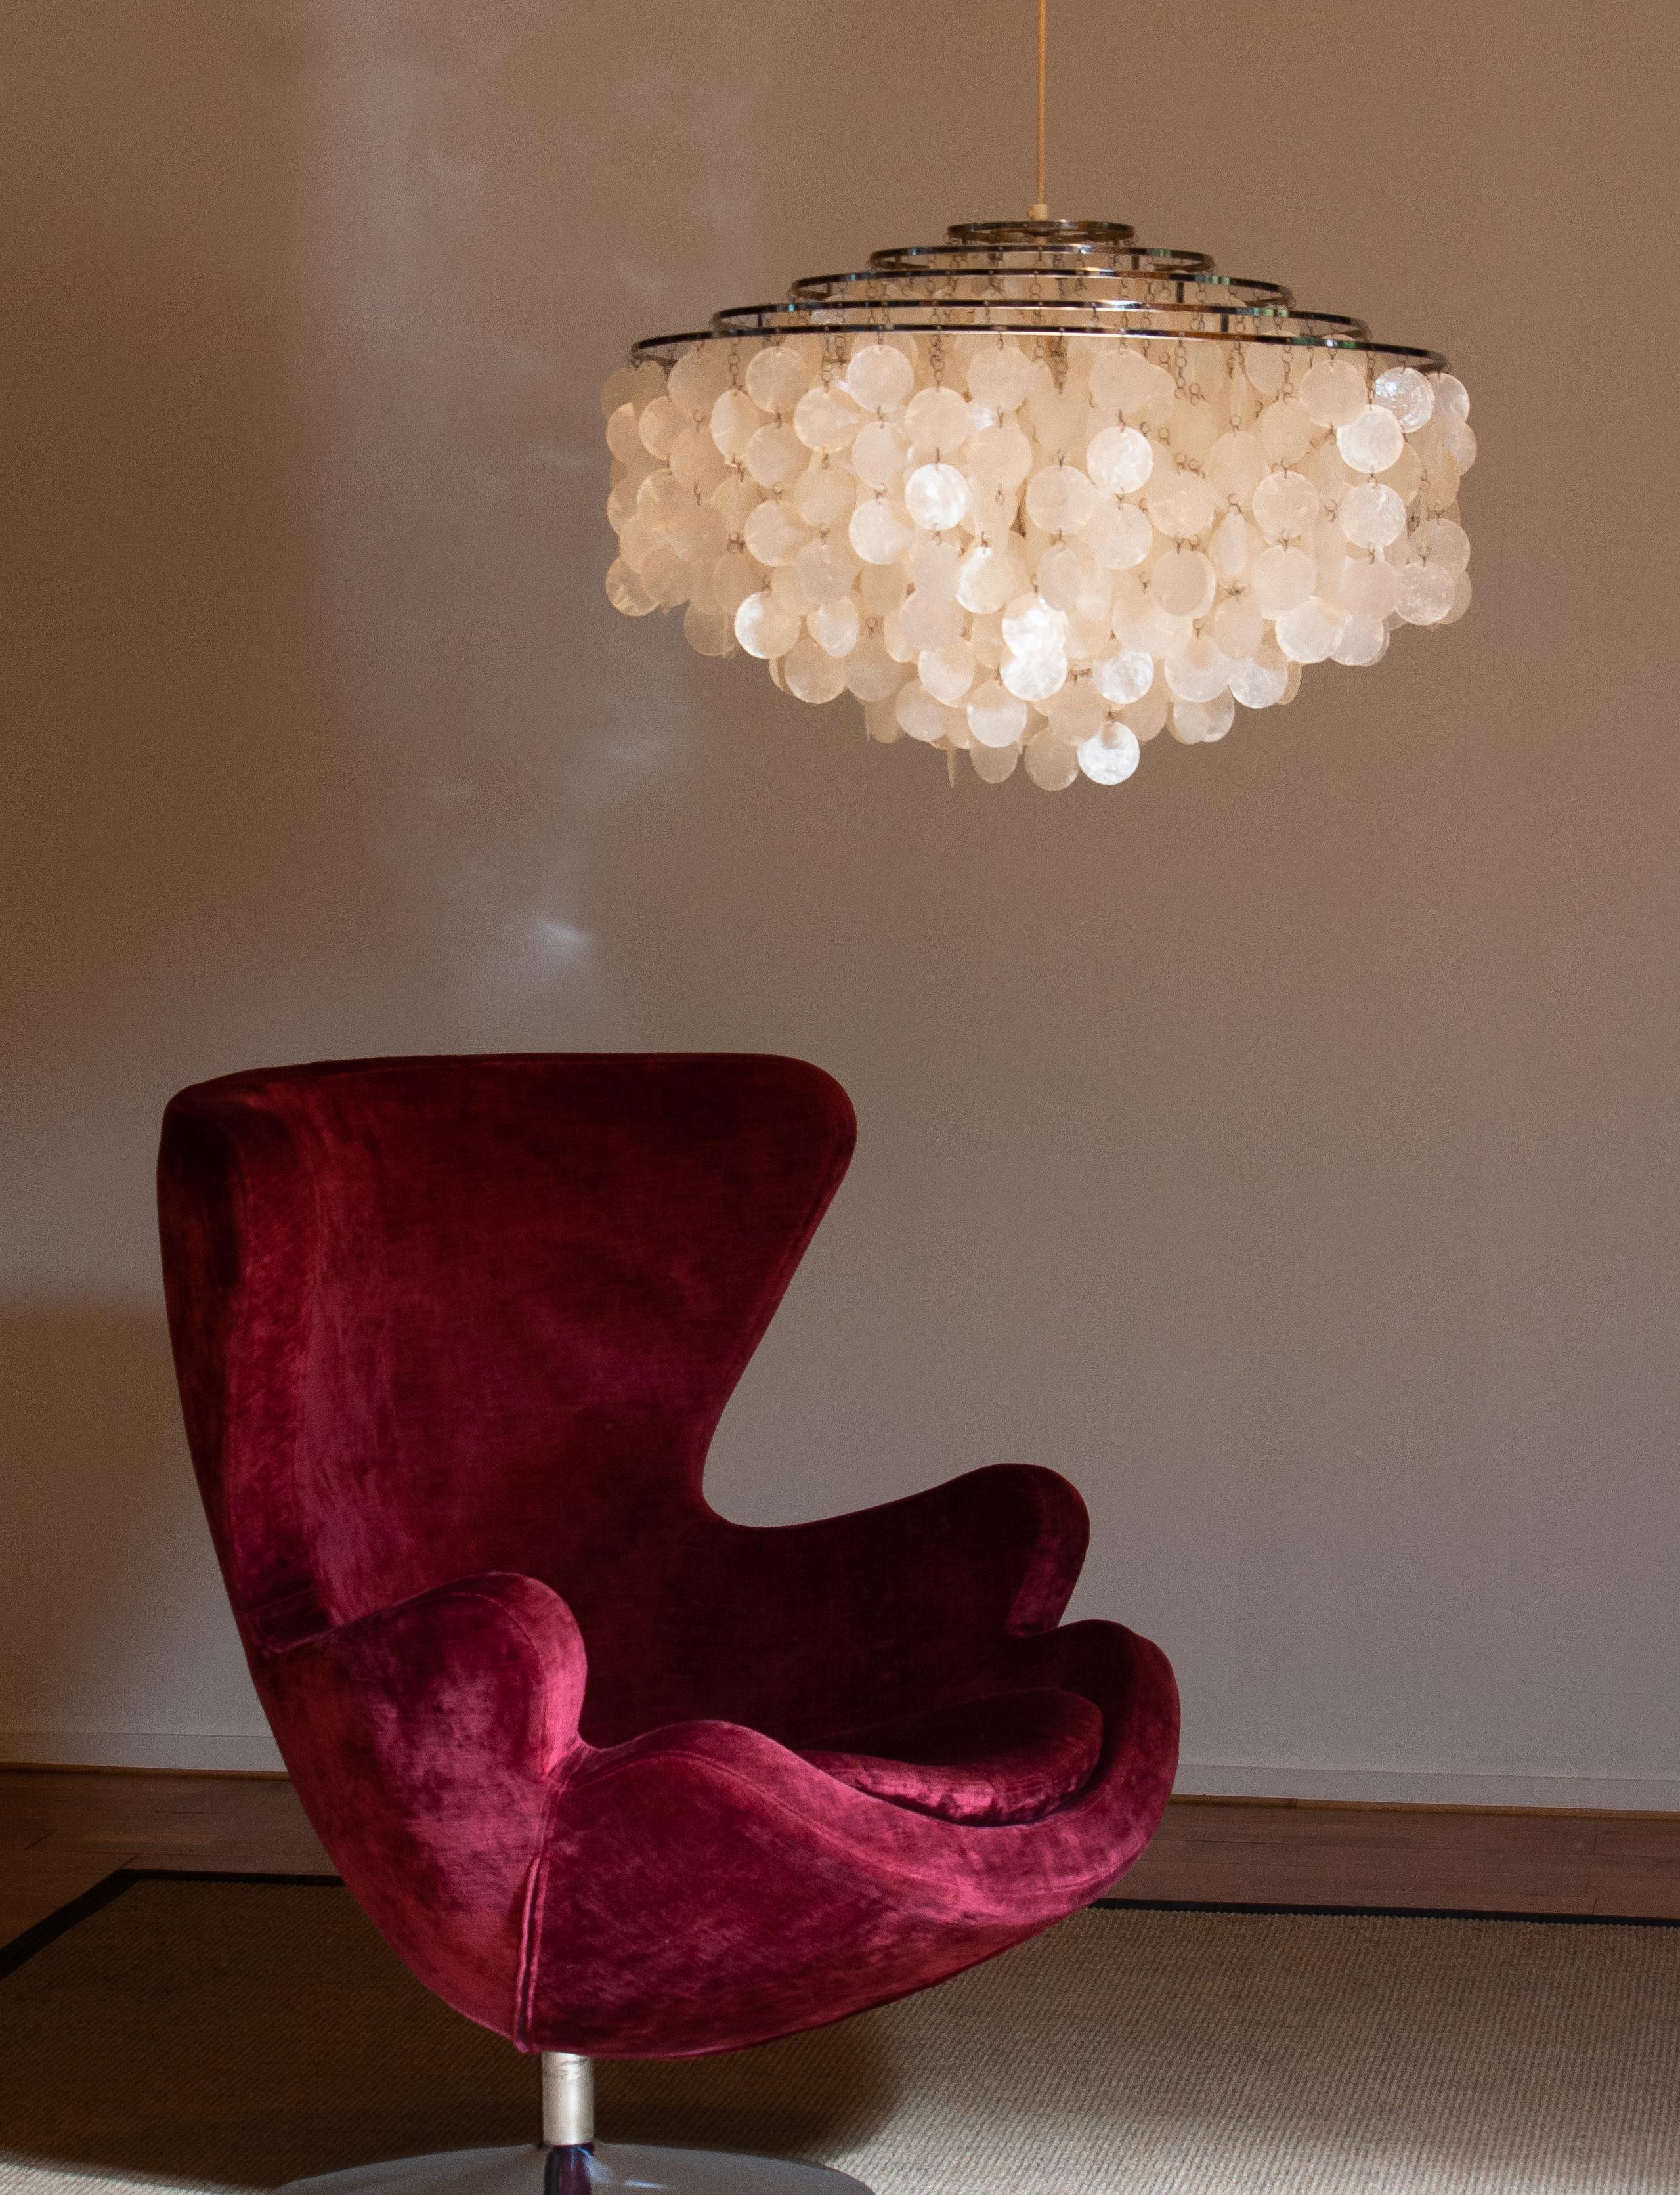 1960s, Extra Large Capiz Shell Chandelier by Verner Panton for Luber Ag, Swiss 1 1